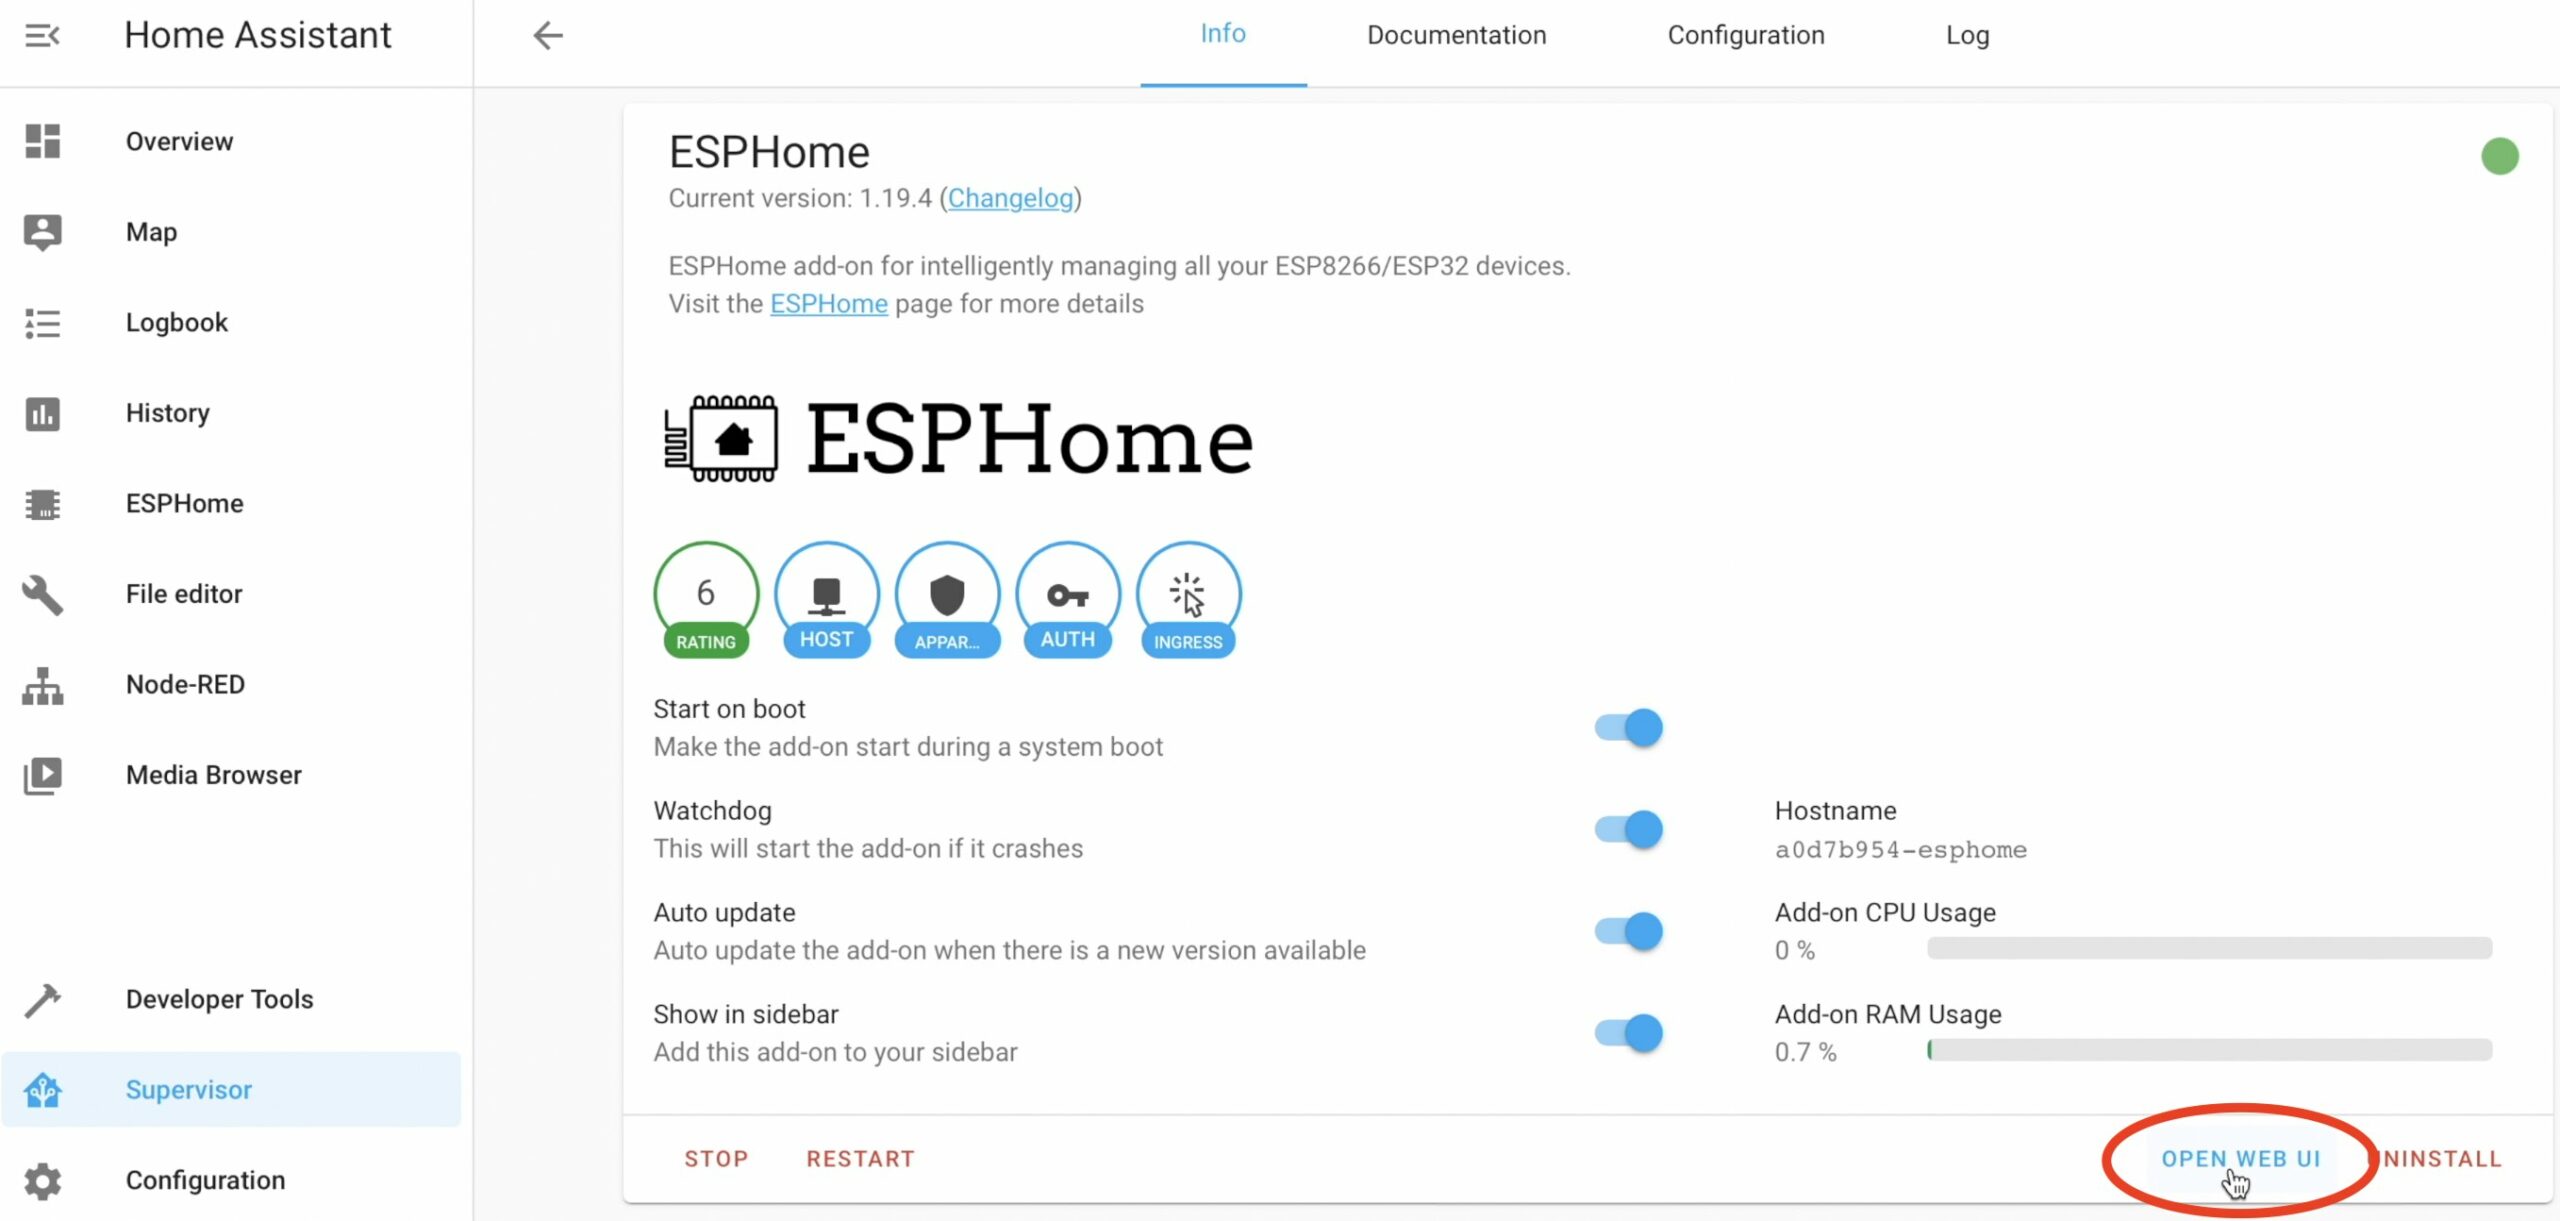 Starting ESPHome add-on in Home Assistant in order to install ESPHome firmware on the D1 Mini later and to make our DIY Motion Sensor accessible.